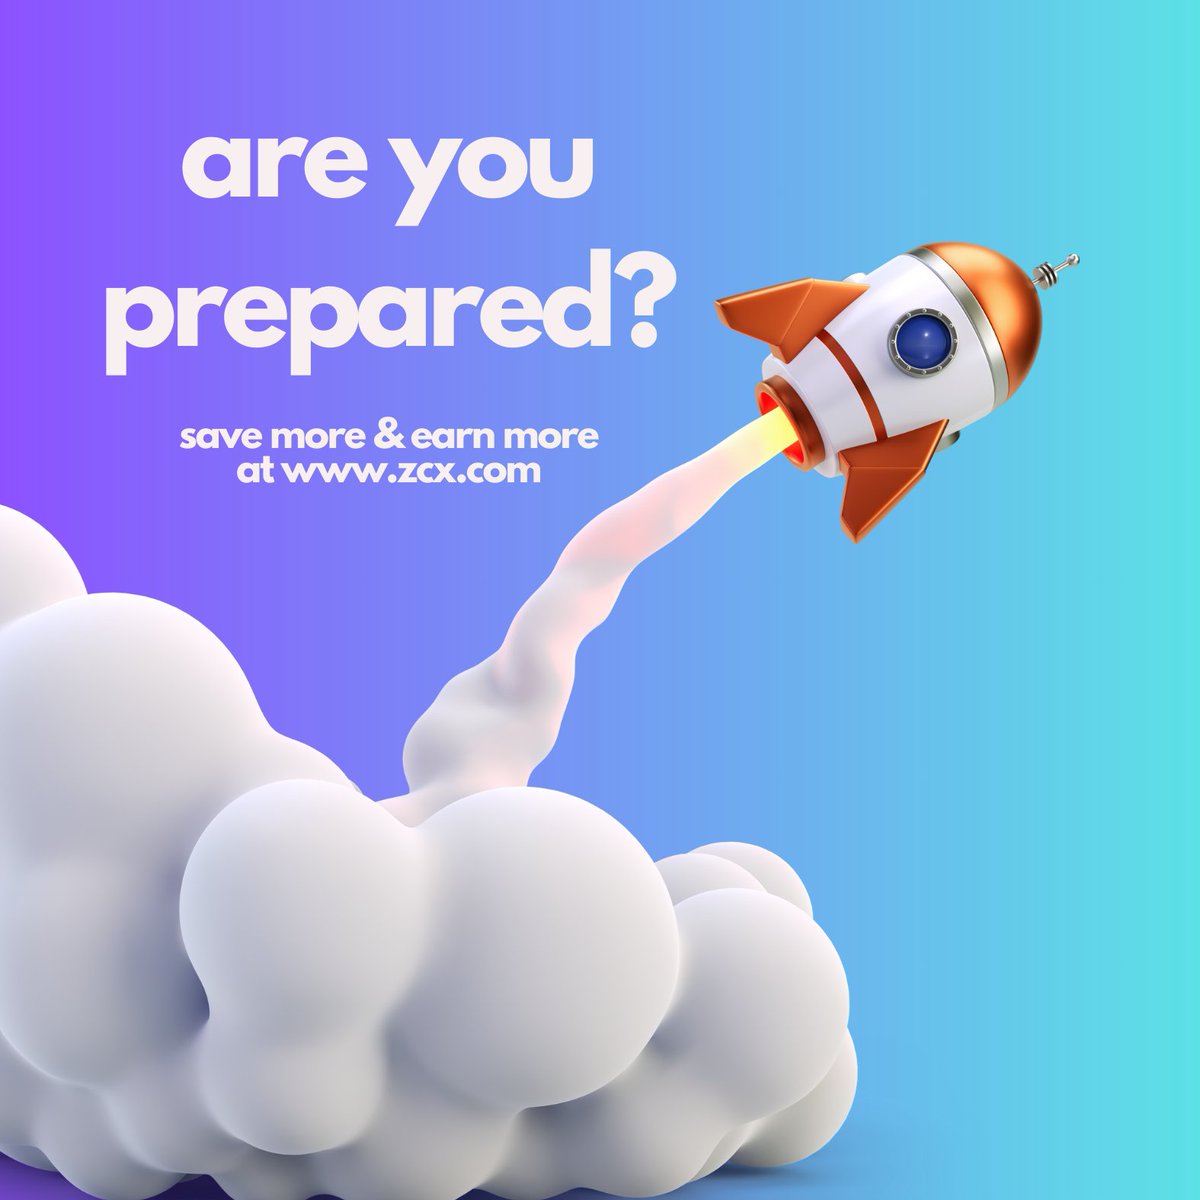 Just a few questions...

Are you prepared for what is going to happen when @unizen_io likely launches their #ETH gas optimization next week to reduce gas by 40-60%? 

Are you prepared for when @unizen_io launches ULDMv3? (which some partners are waiting for before they go live